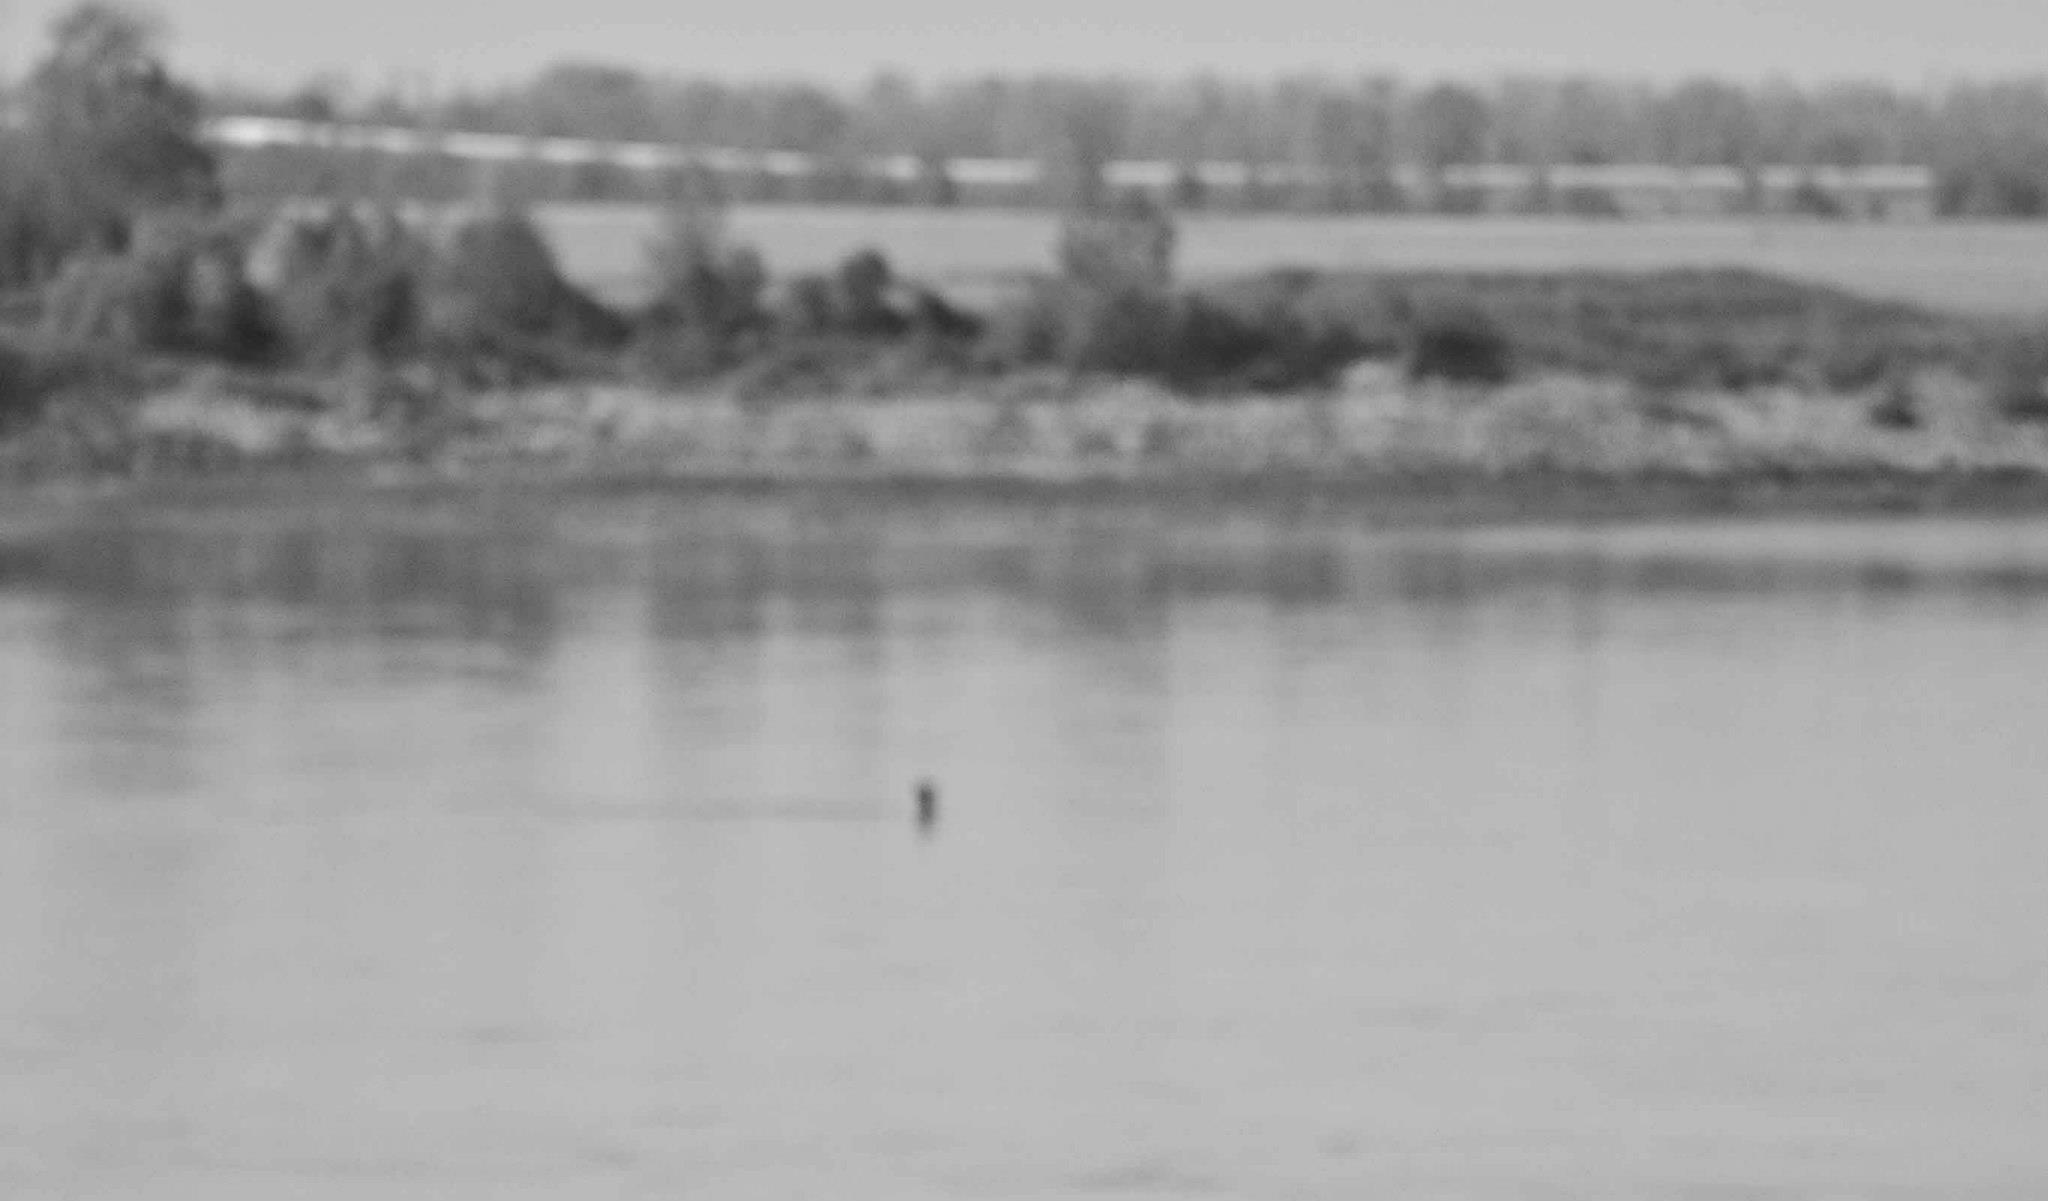 B&W Blurry Photo of a pipe in the Mississippi River that looks like a river monster